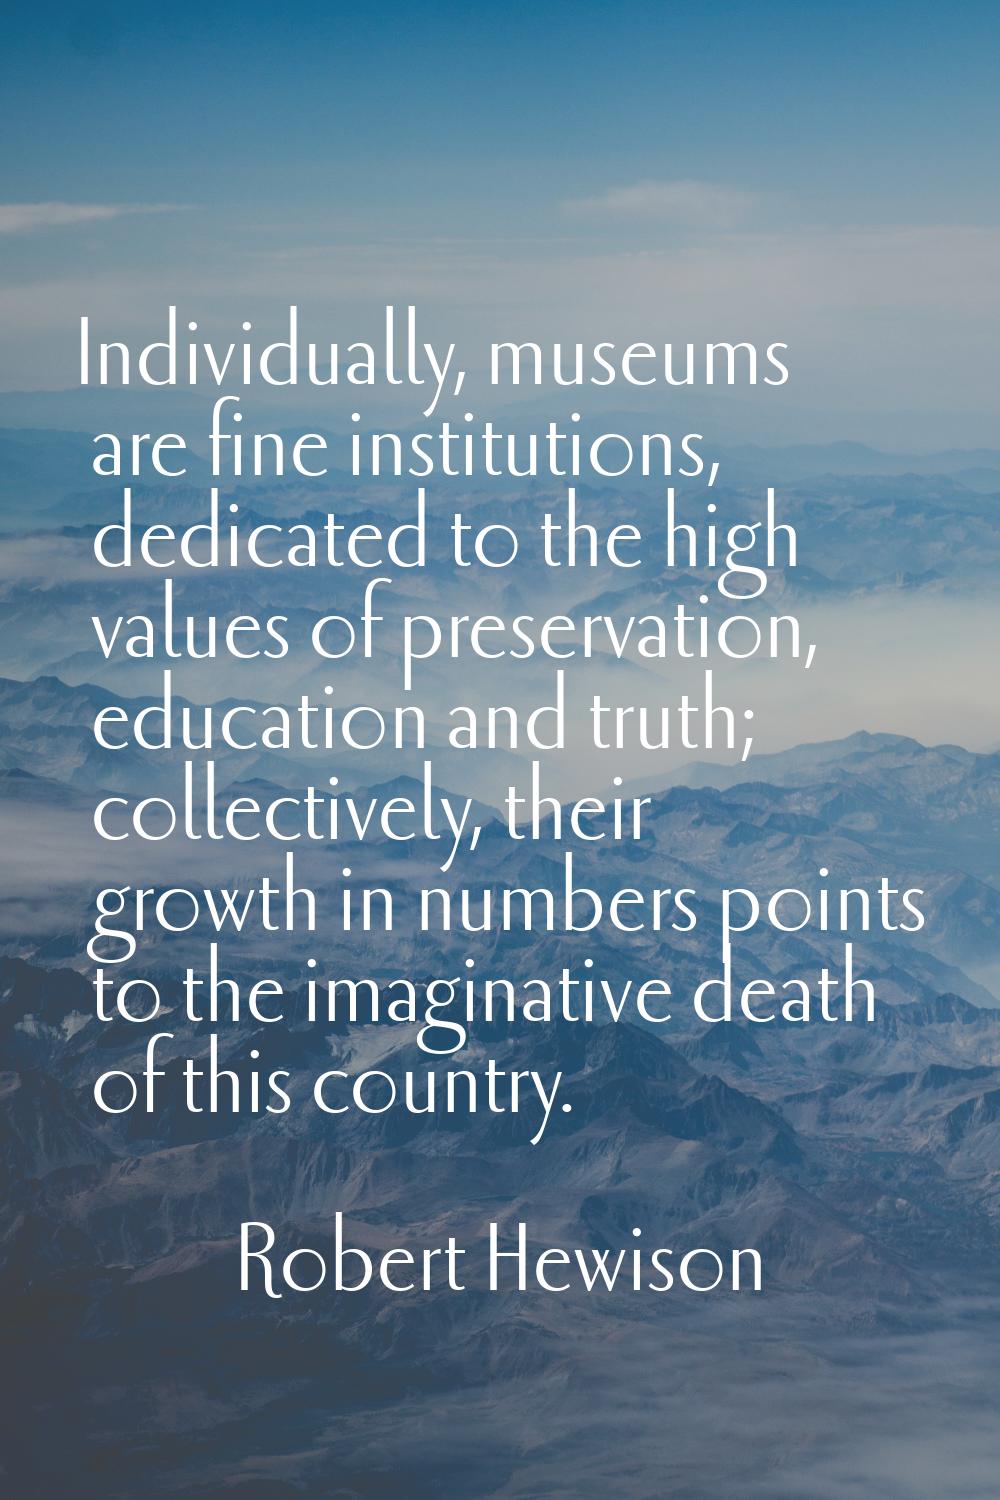 Individually, museums are fine institutions, dedicated to the high values of preservation, educatio